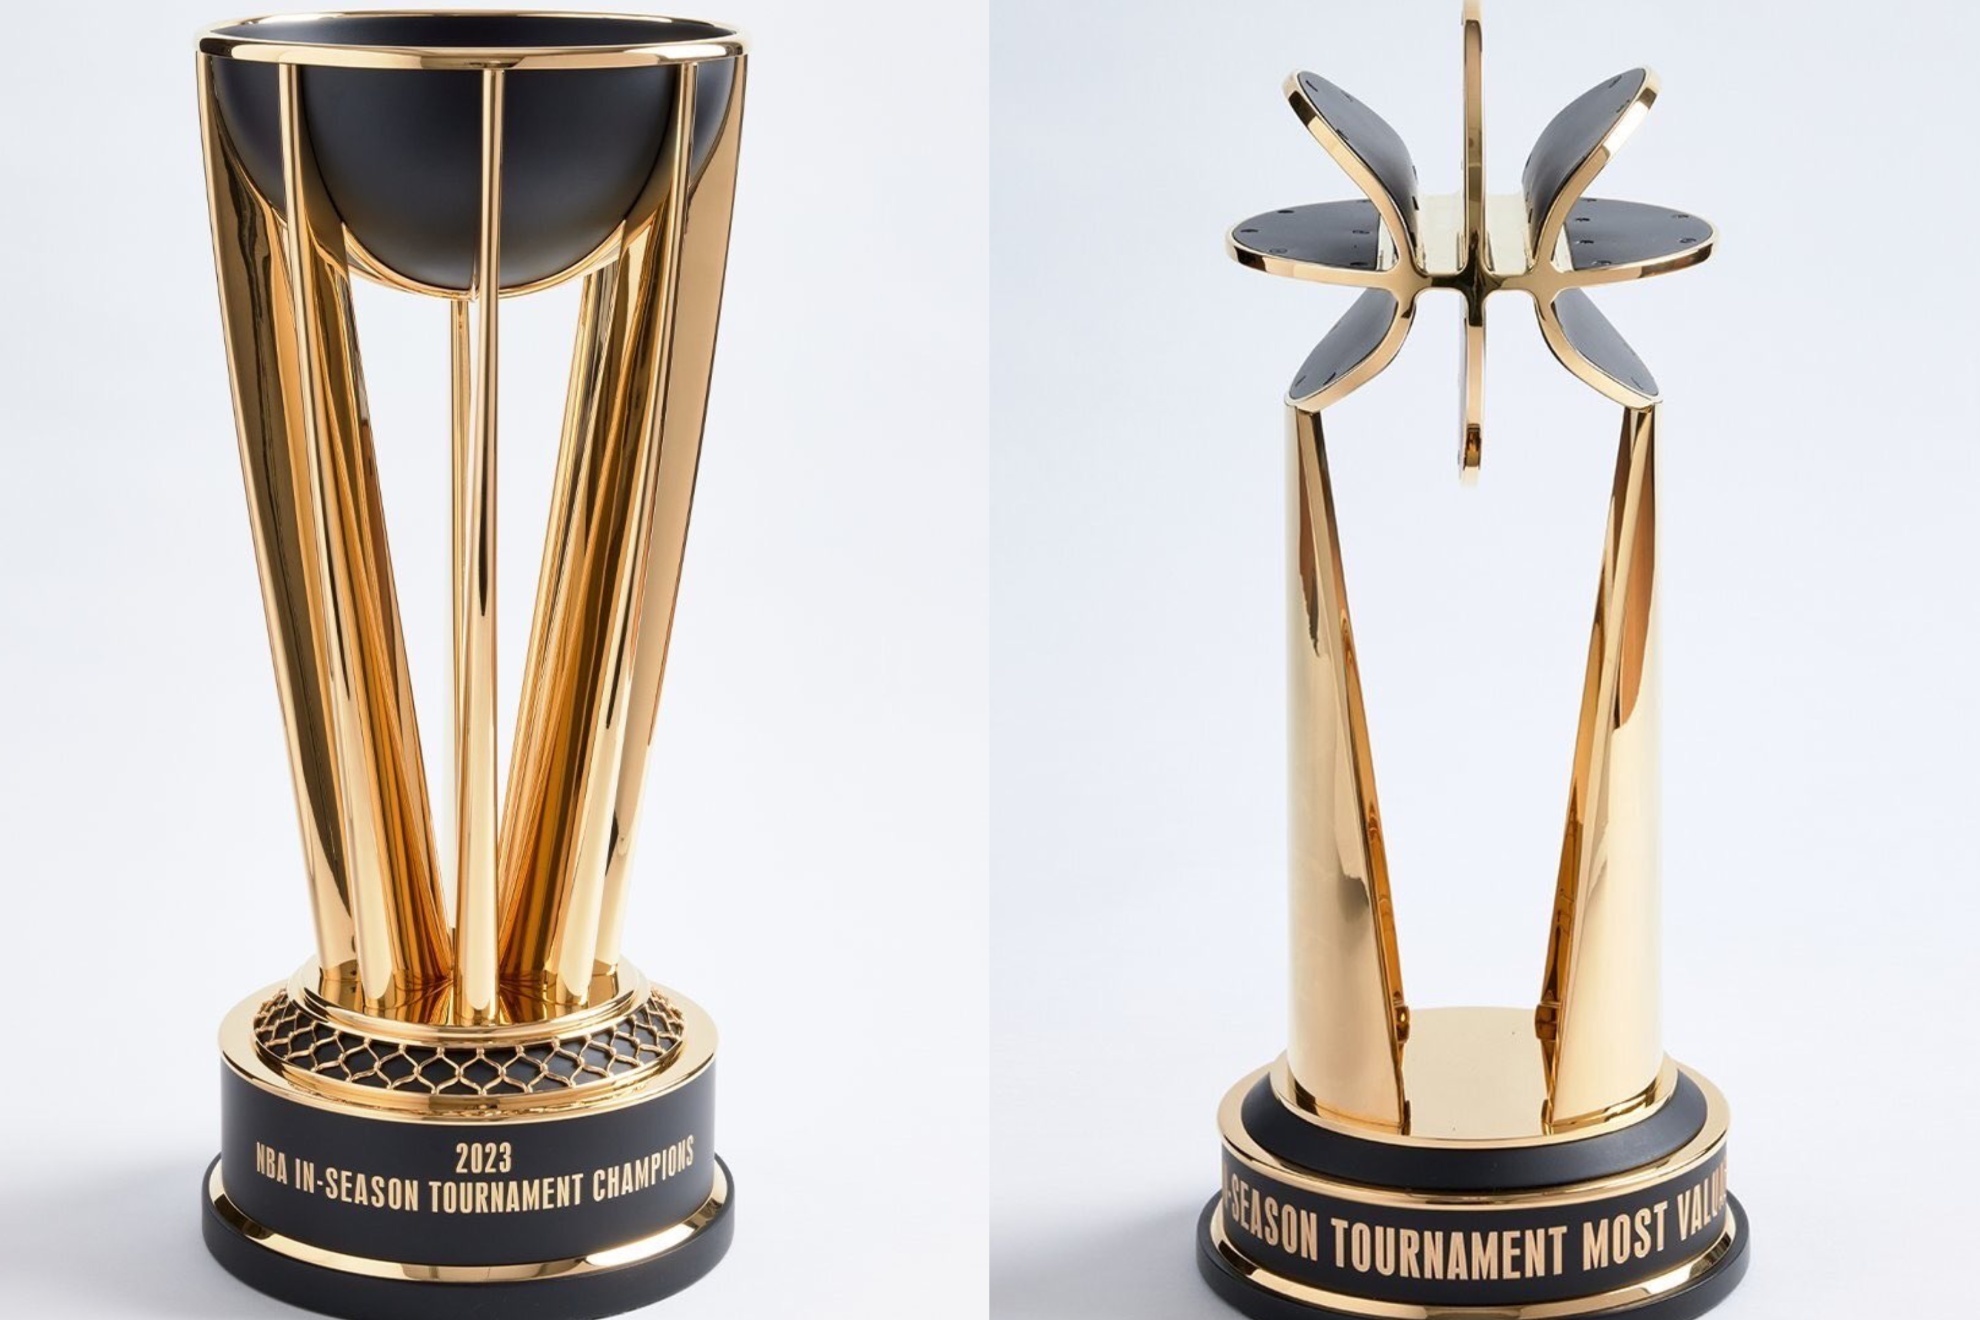 The NBA unveiled the new hardware for the In-Season tournament Champions